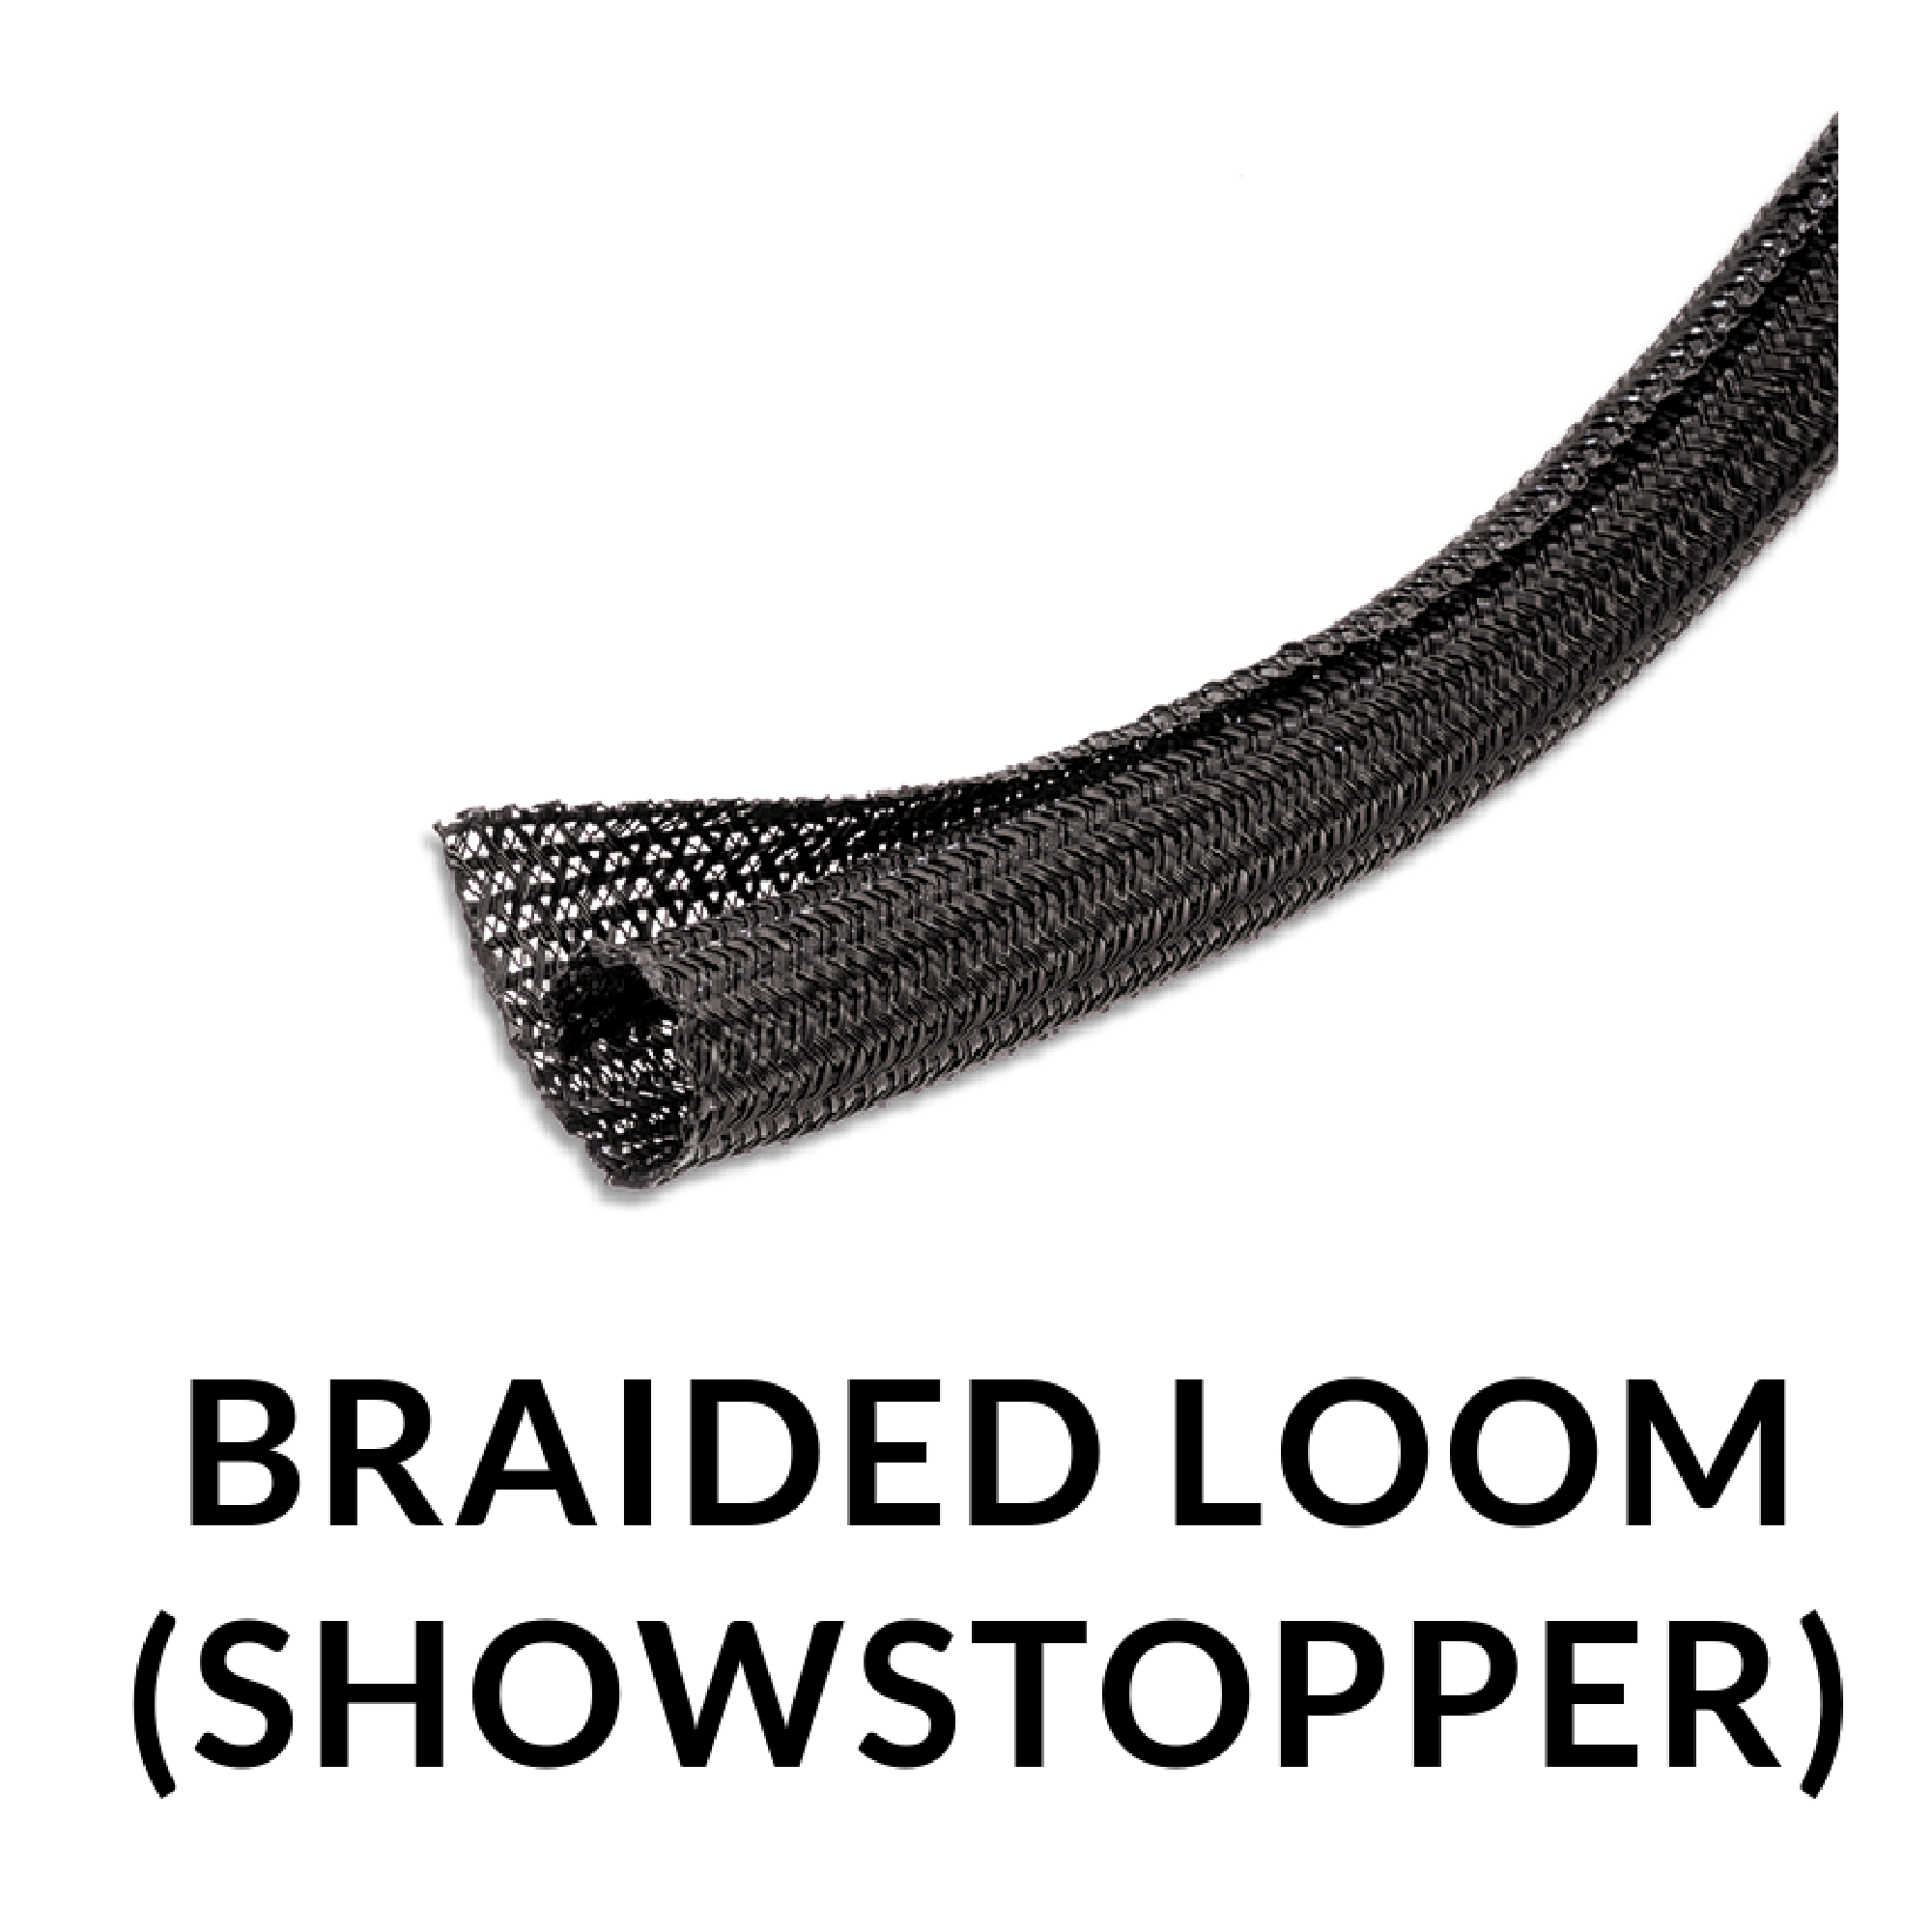 Show Stopper Braided Loom +$100.00